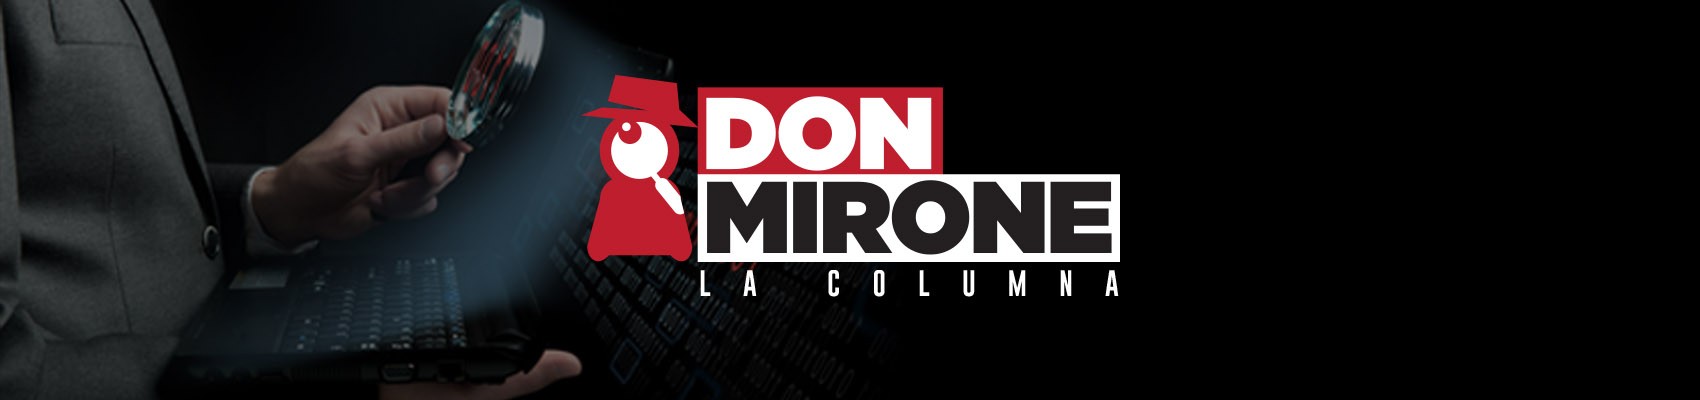 Don Mirone